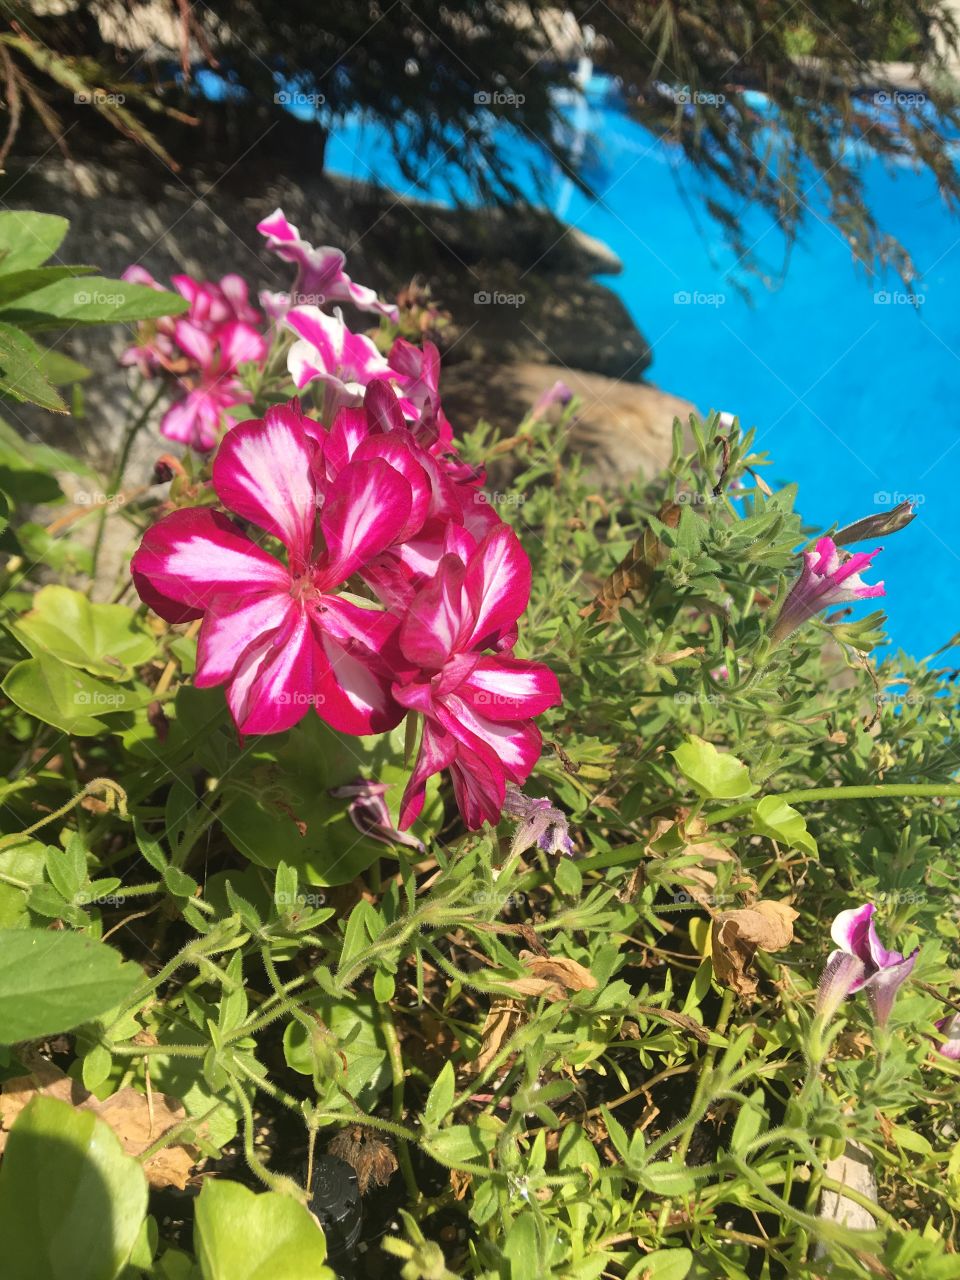 Bright pink flowers sit on the edge of a clear blue pool